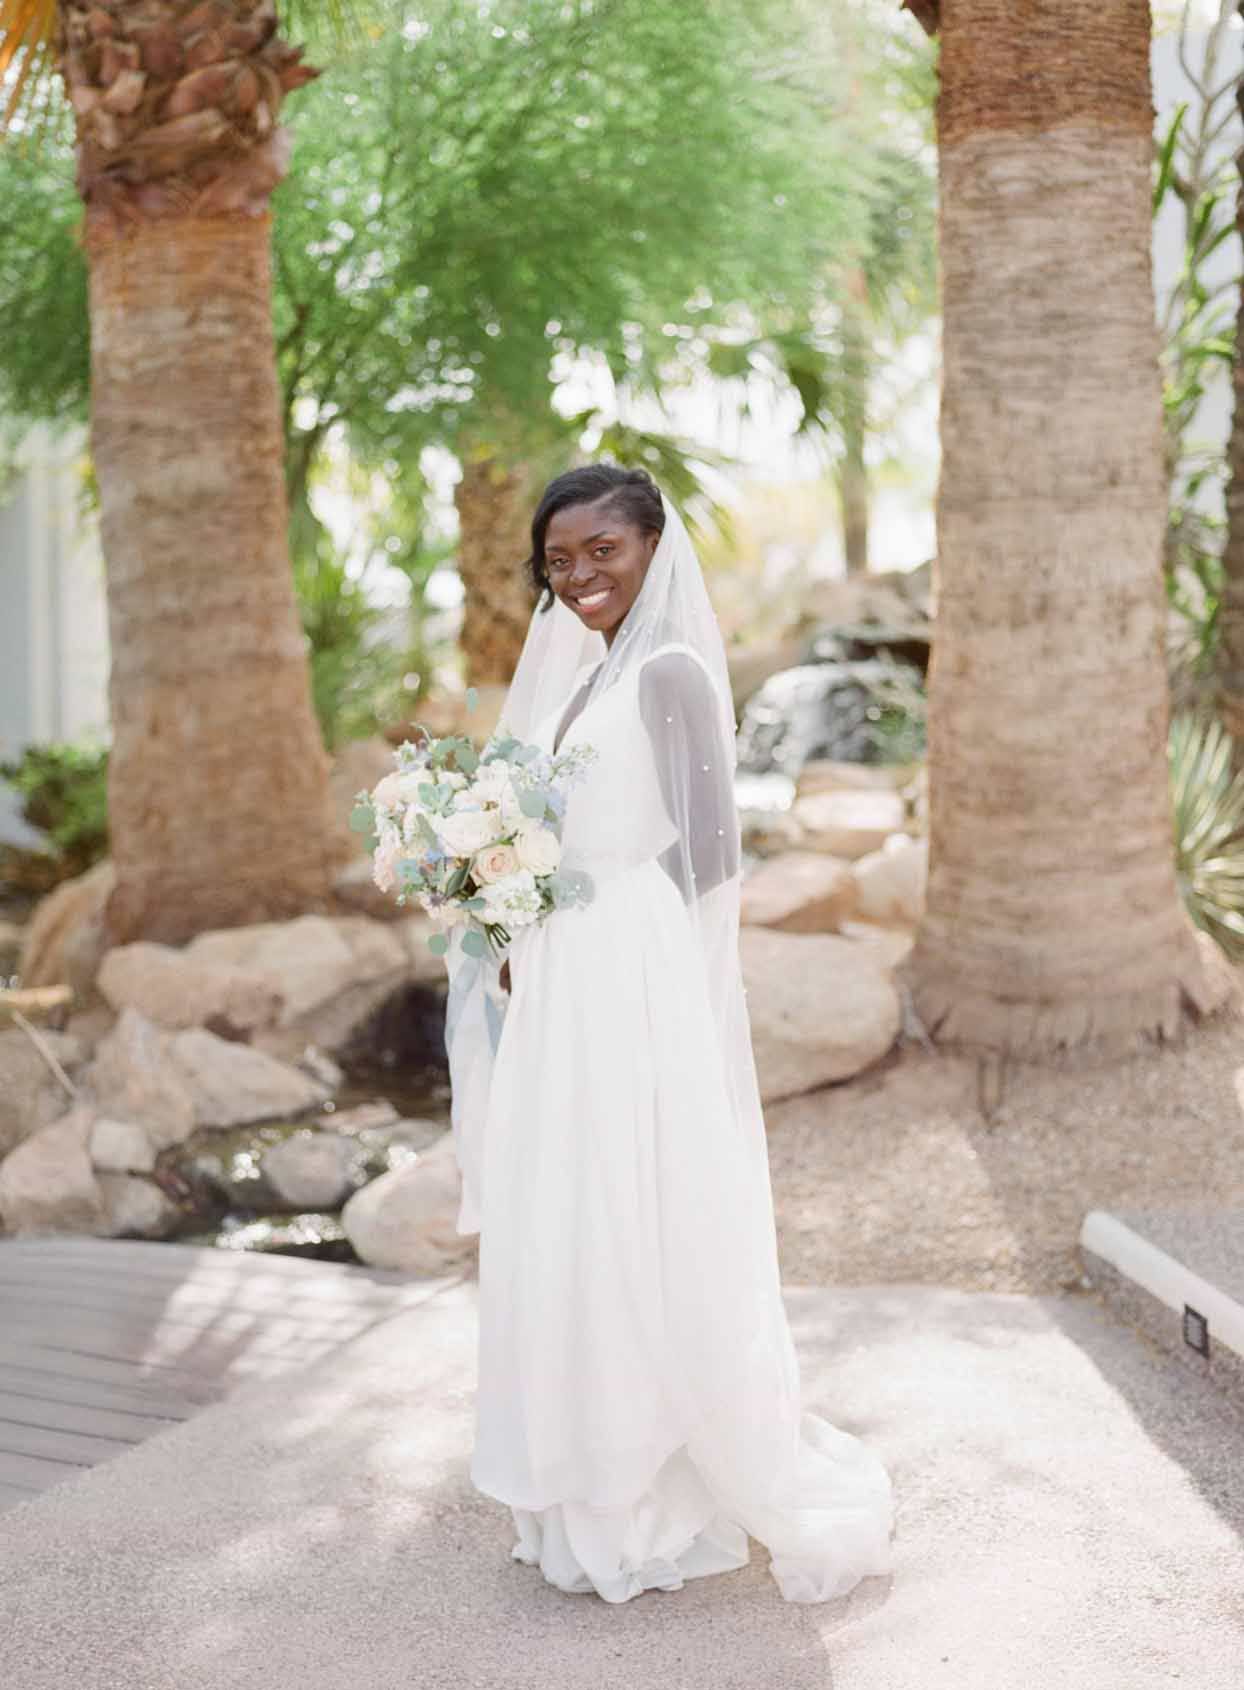 Enyo Looked Stunning In A Simple White Wedding Gown With Pearl-Accented Belt and Veil